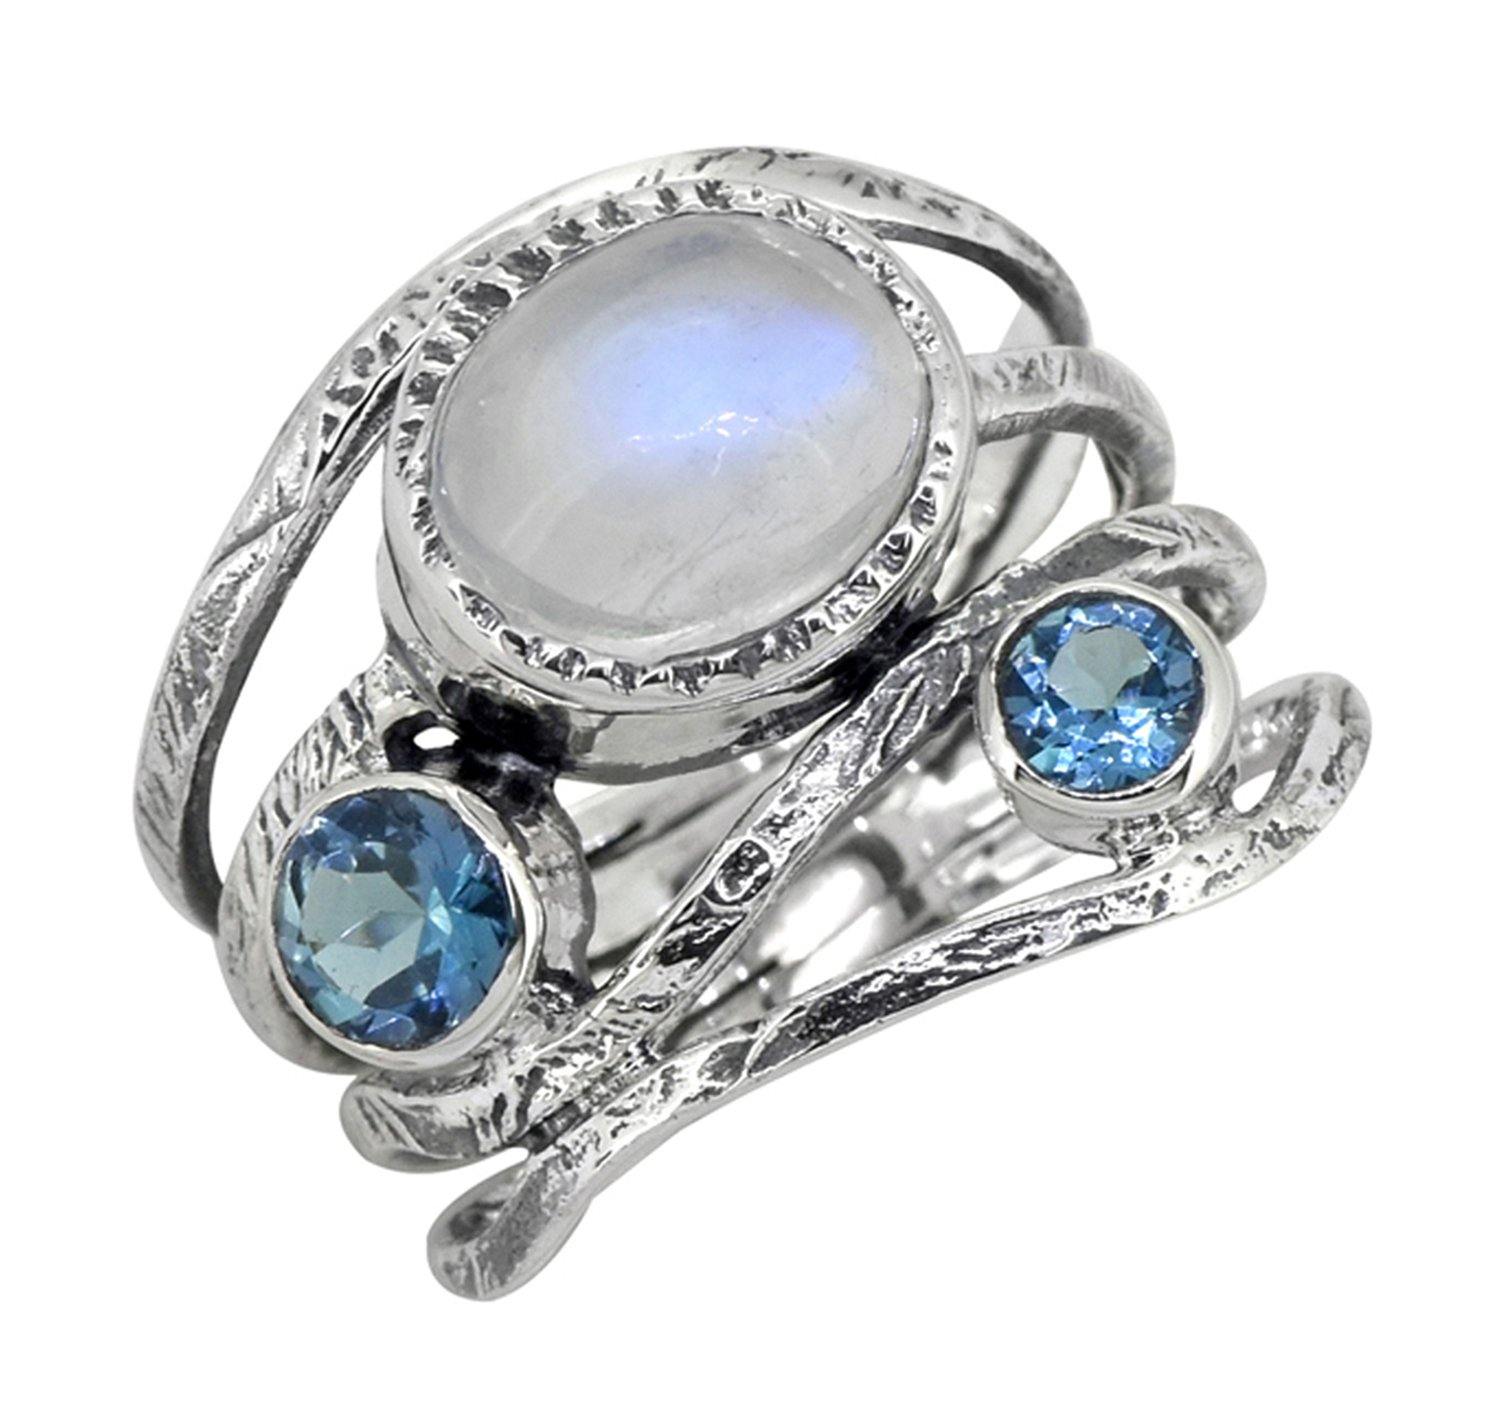 Moonstone London Blue Topaz Solid 925 Sterling Silver Designer Bypass Ring Jewelry - YoTreasure